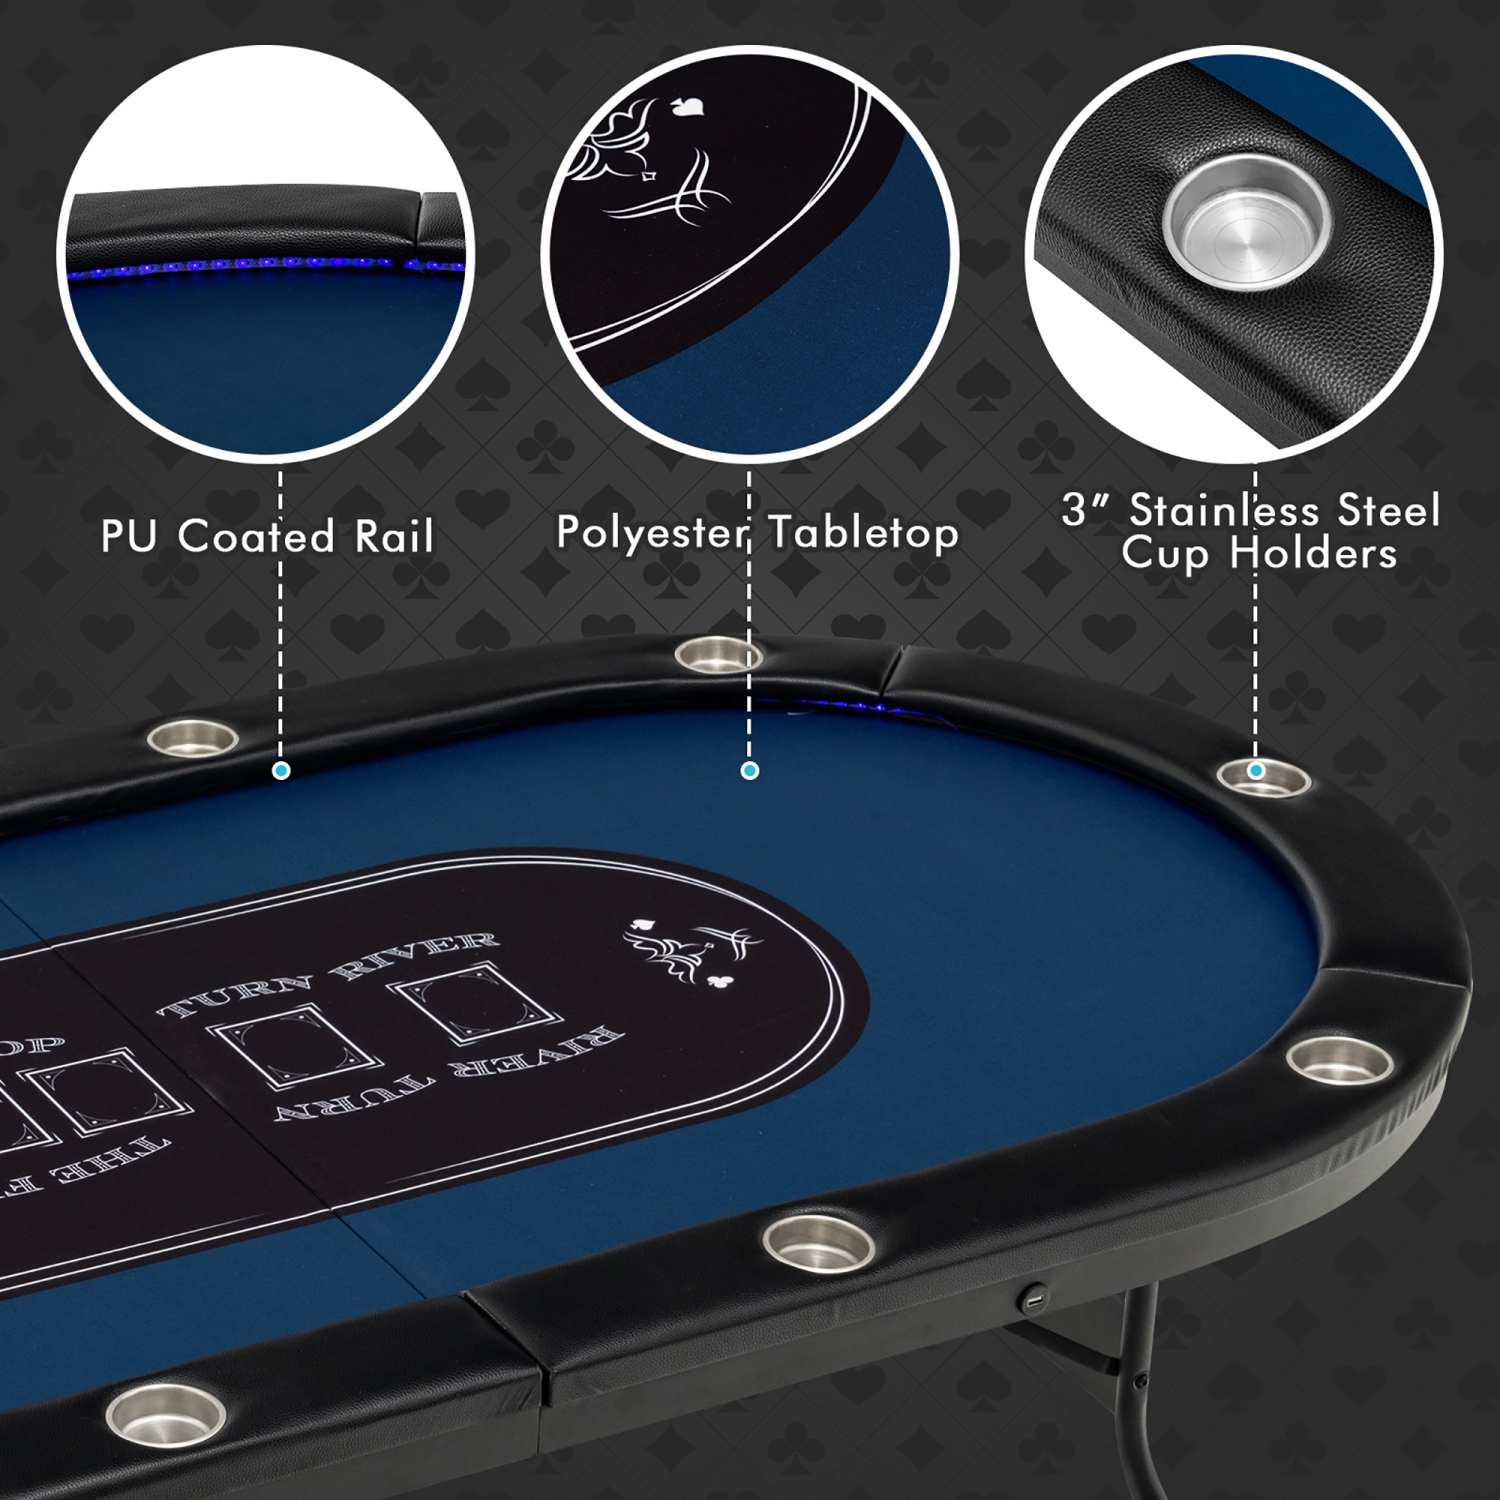 Costway Foldable 10 Player Poker Table Casino Texas Holdem W/ LED